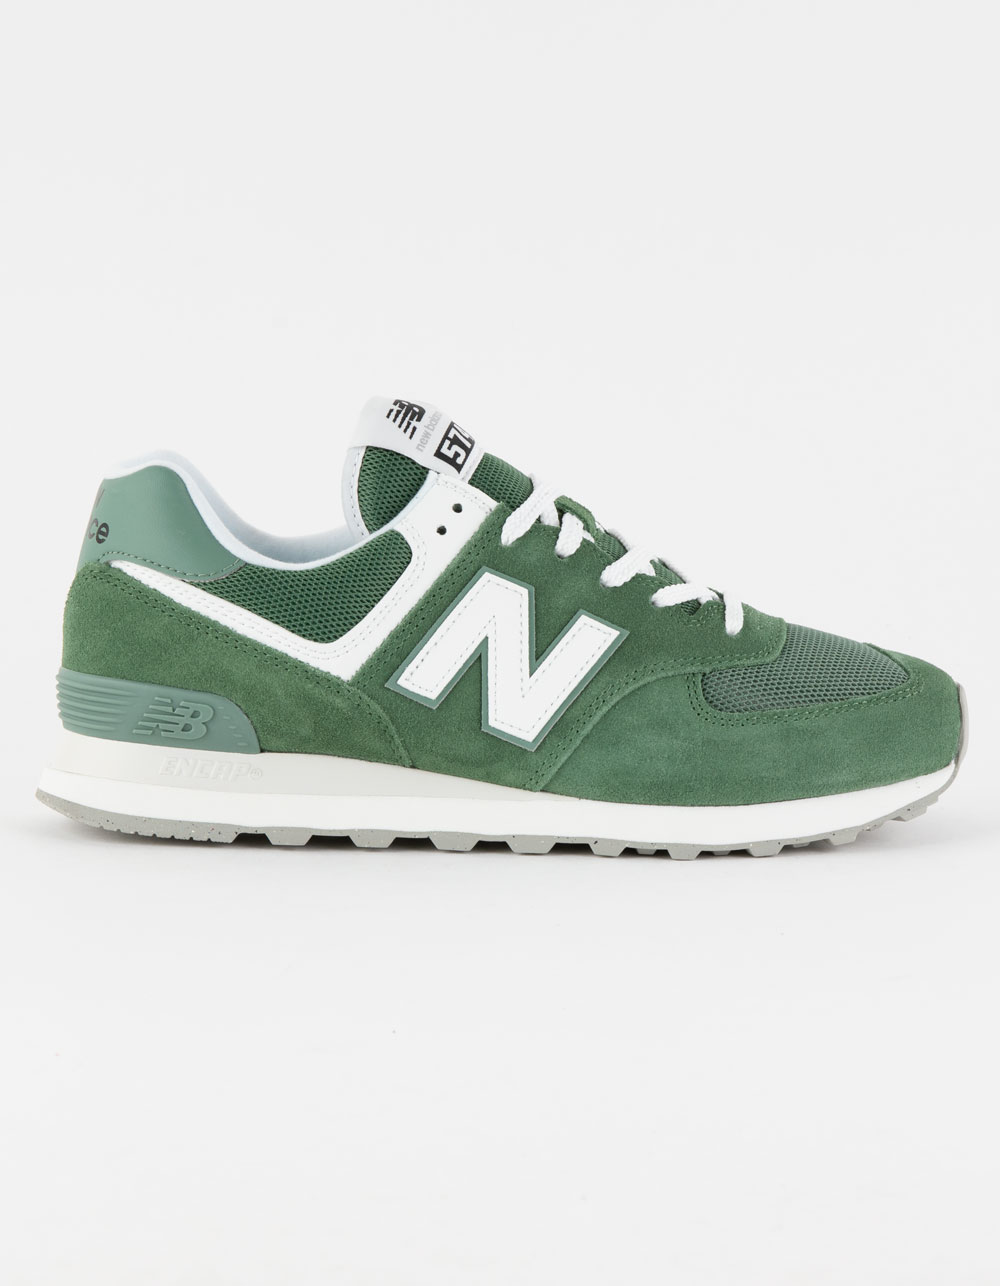 NEW BALANCE 574 Shoes - GREEN/WHITE | Tillys